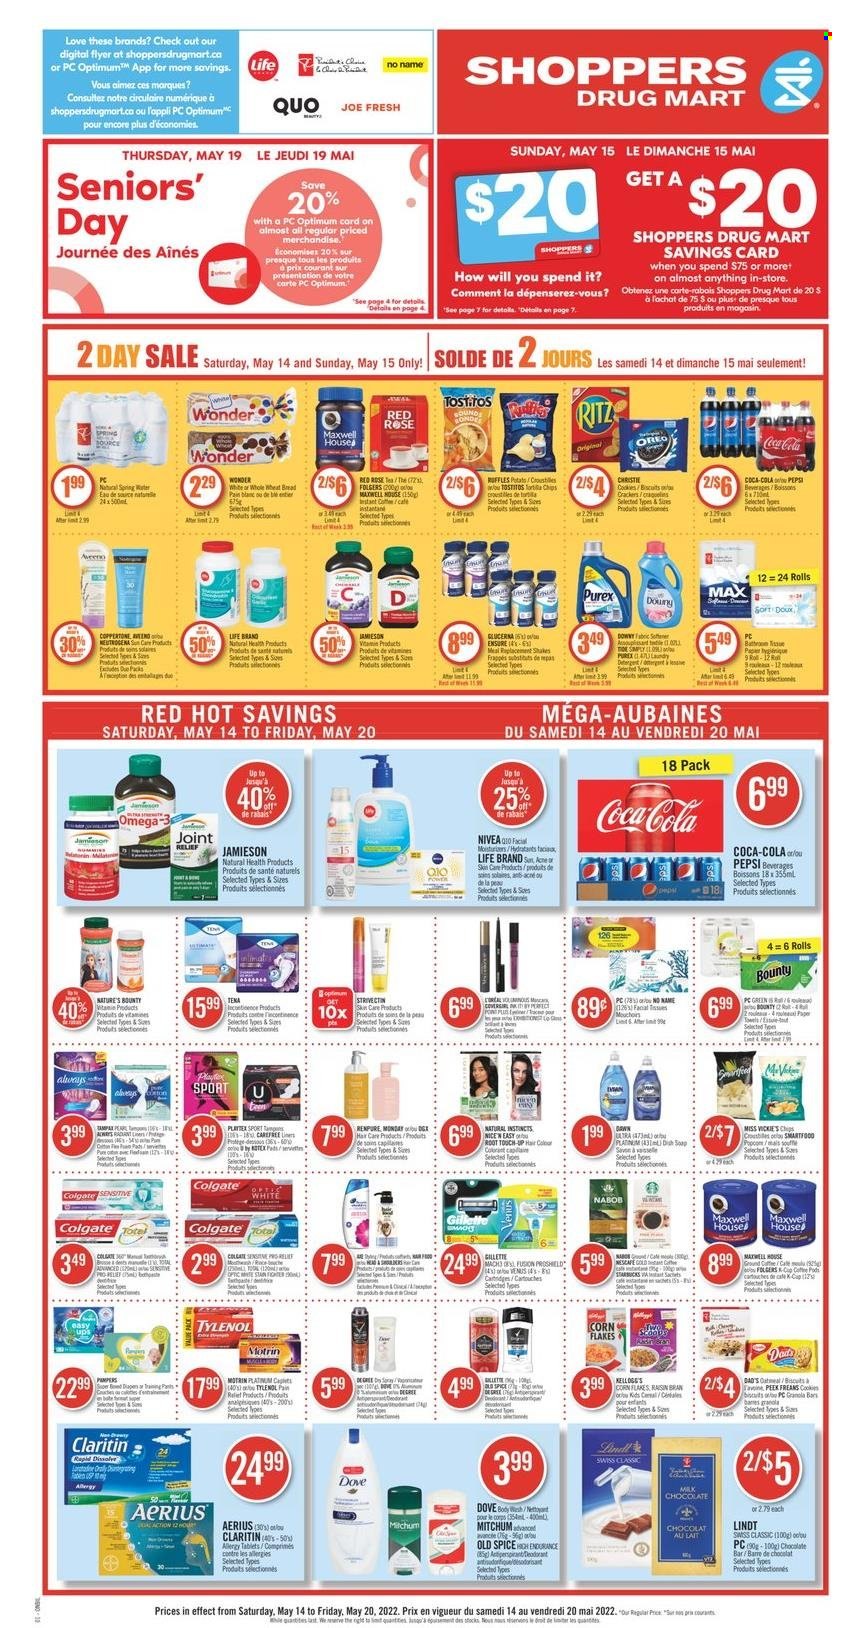 thumbnail - Shoppers Drug Mart Flyer - May 14, 2022 - May 20, 2022 - Sales products - milk chocolate, chocolate, Bounty, crackers, biscuit, RITZ, Ruffles, corn flakes, granola bar, spice, Coca-Cola, Pepsi, tea, Folgers, Nivea, Purex, soap, Root Touch-Up, Gillette, Tylenol, Omega-3, Glucerna, Motrin, Dove, Colgate, Old Spice, Oreo, Lindt, Nescafé. Page 1.